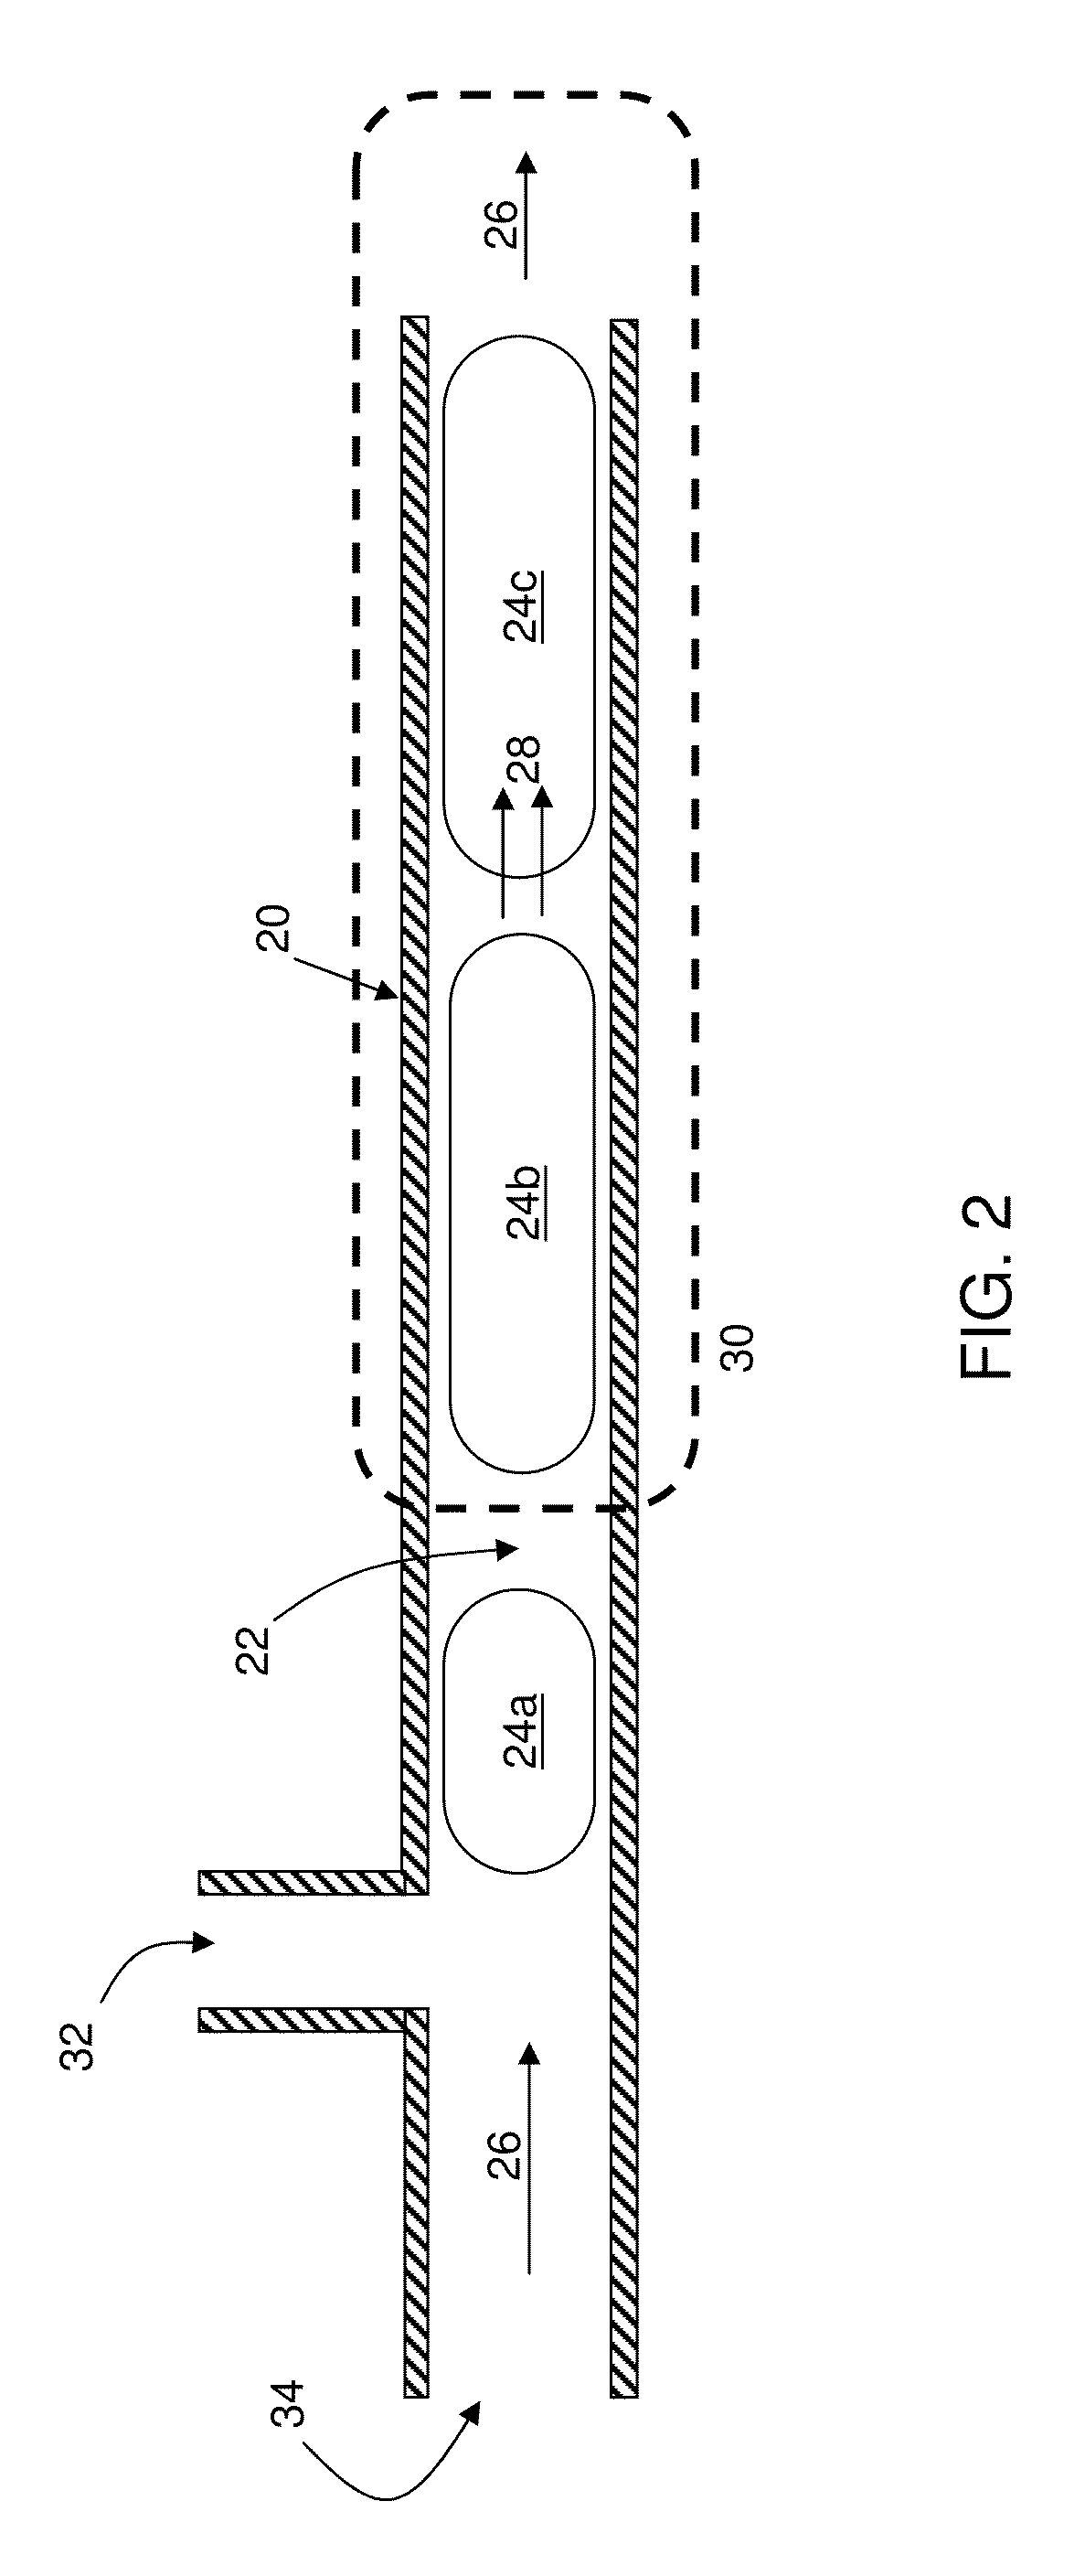 Small-scale method and apparatus for separating mixtures